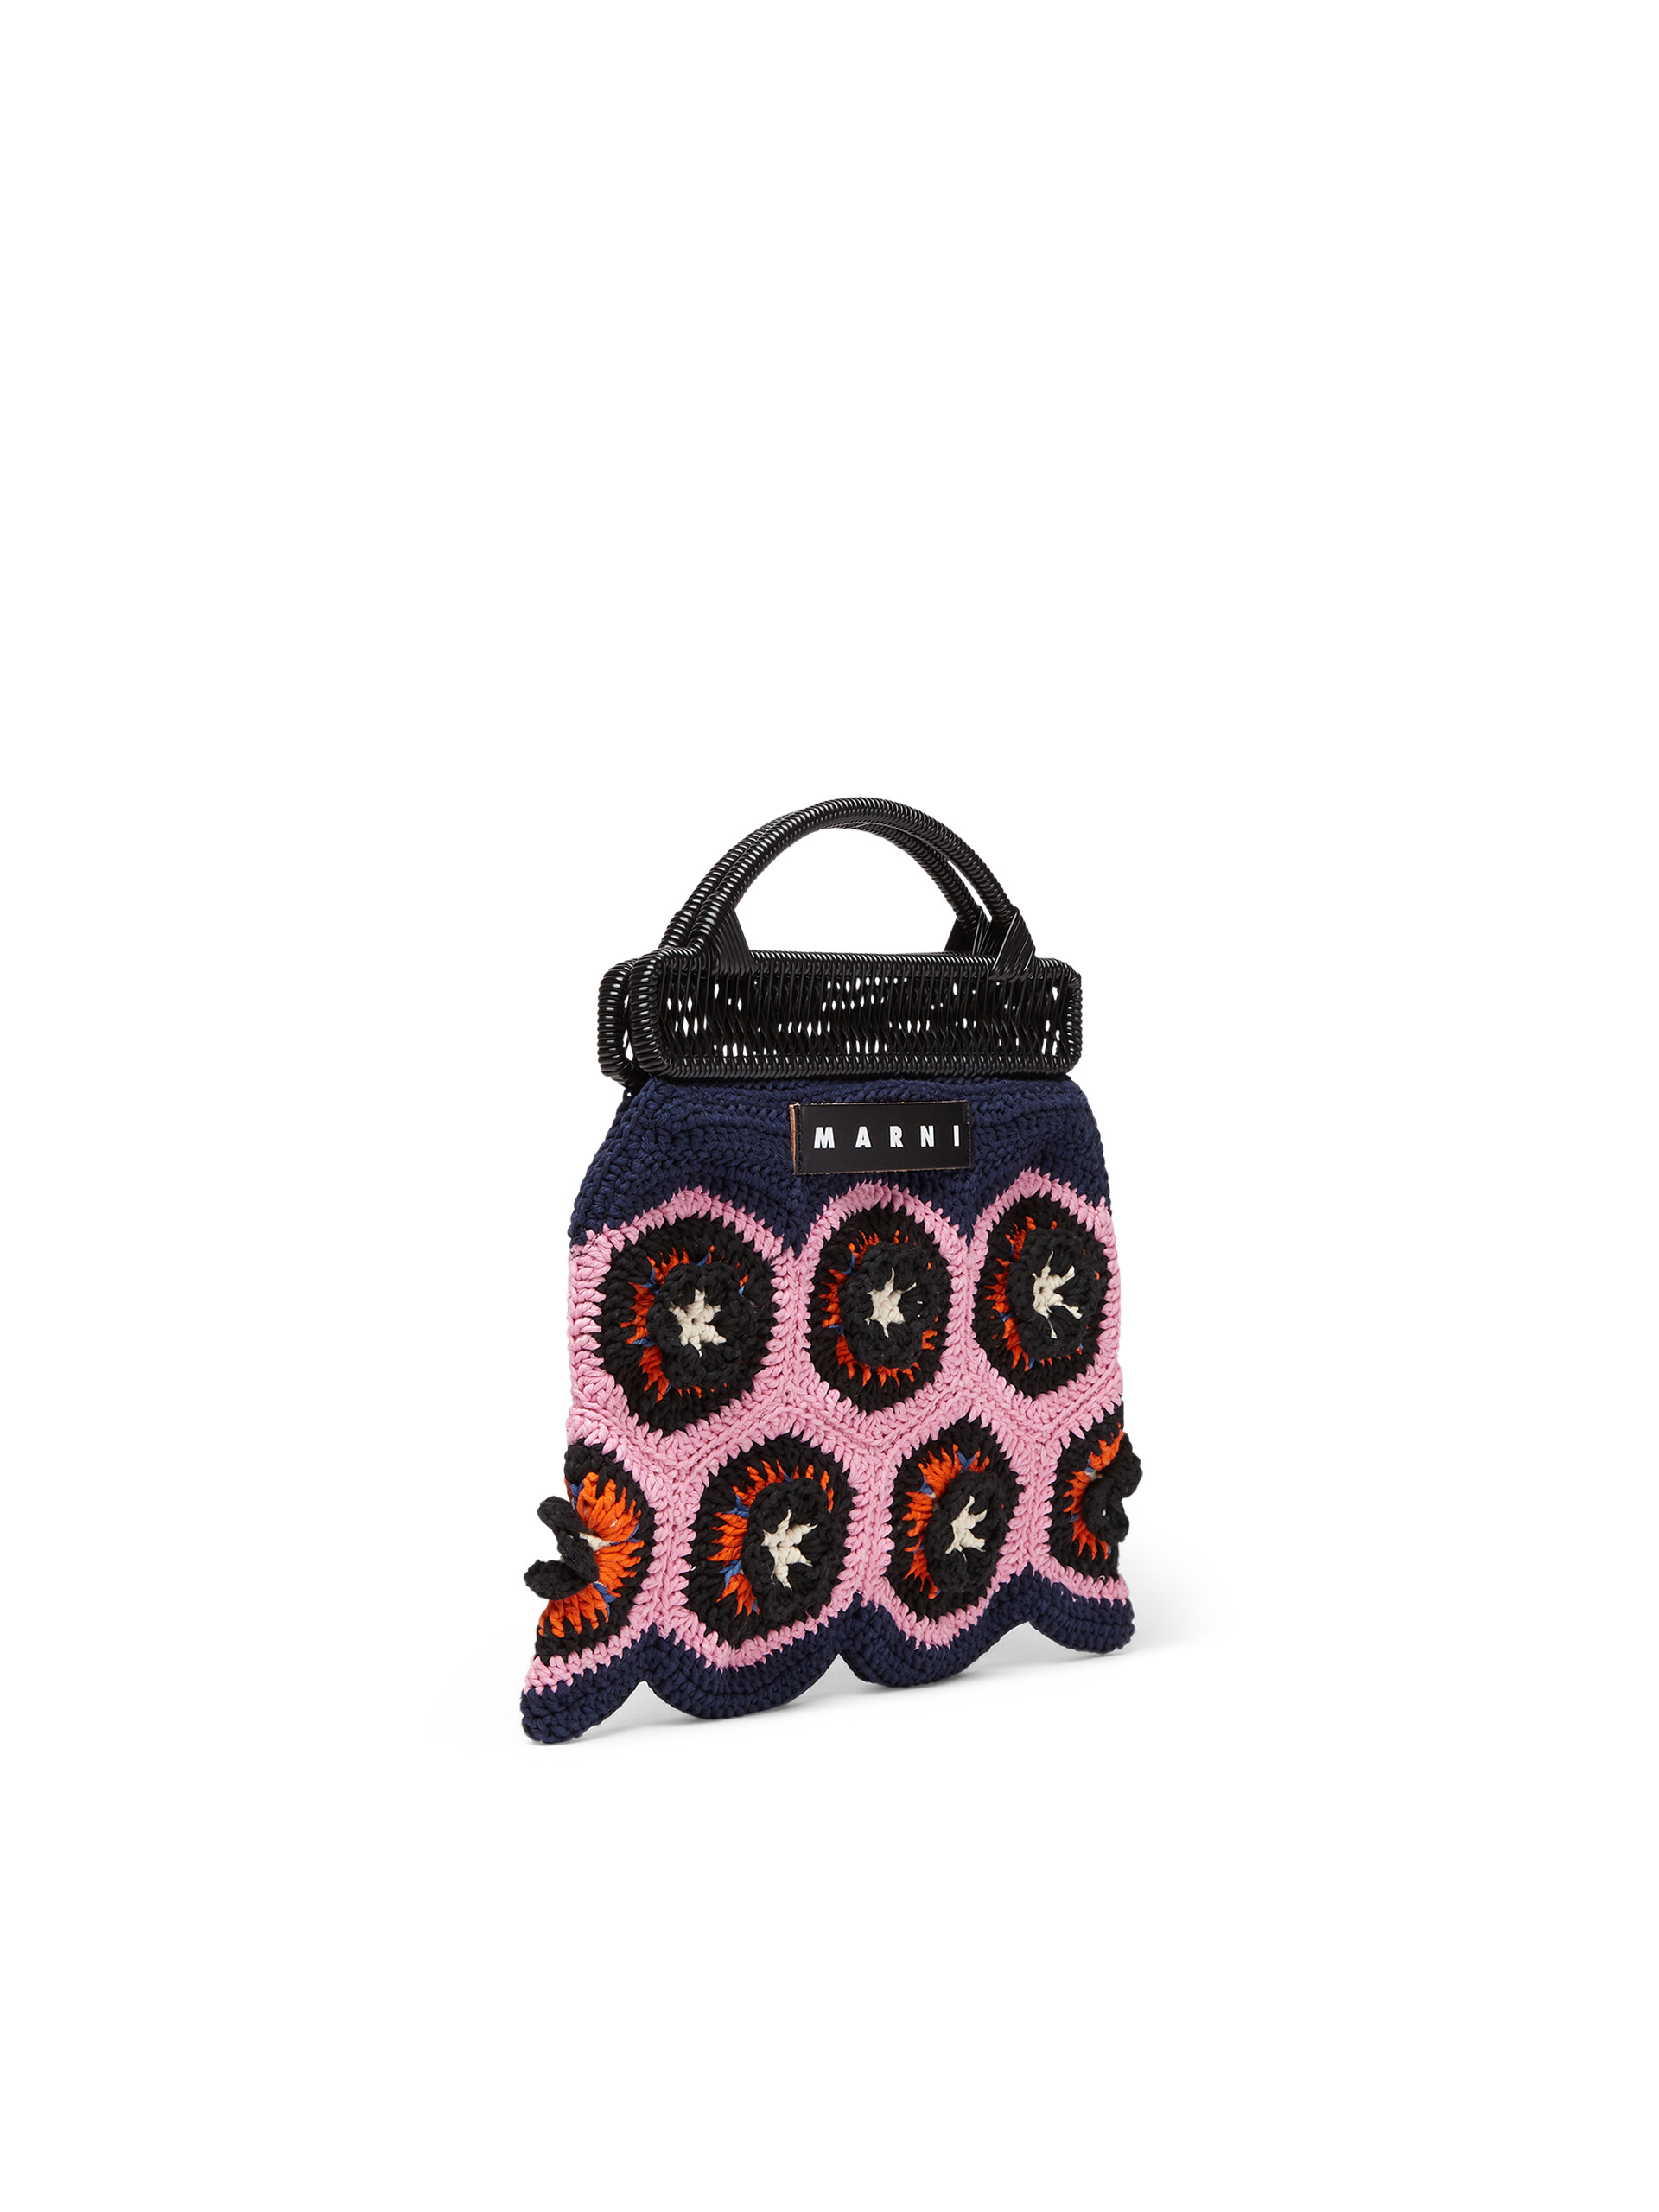 MARNI MARKET bag in pink and blue crochet cotton - Furniture - Image 2